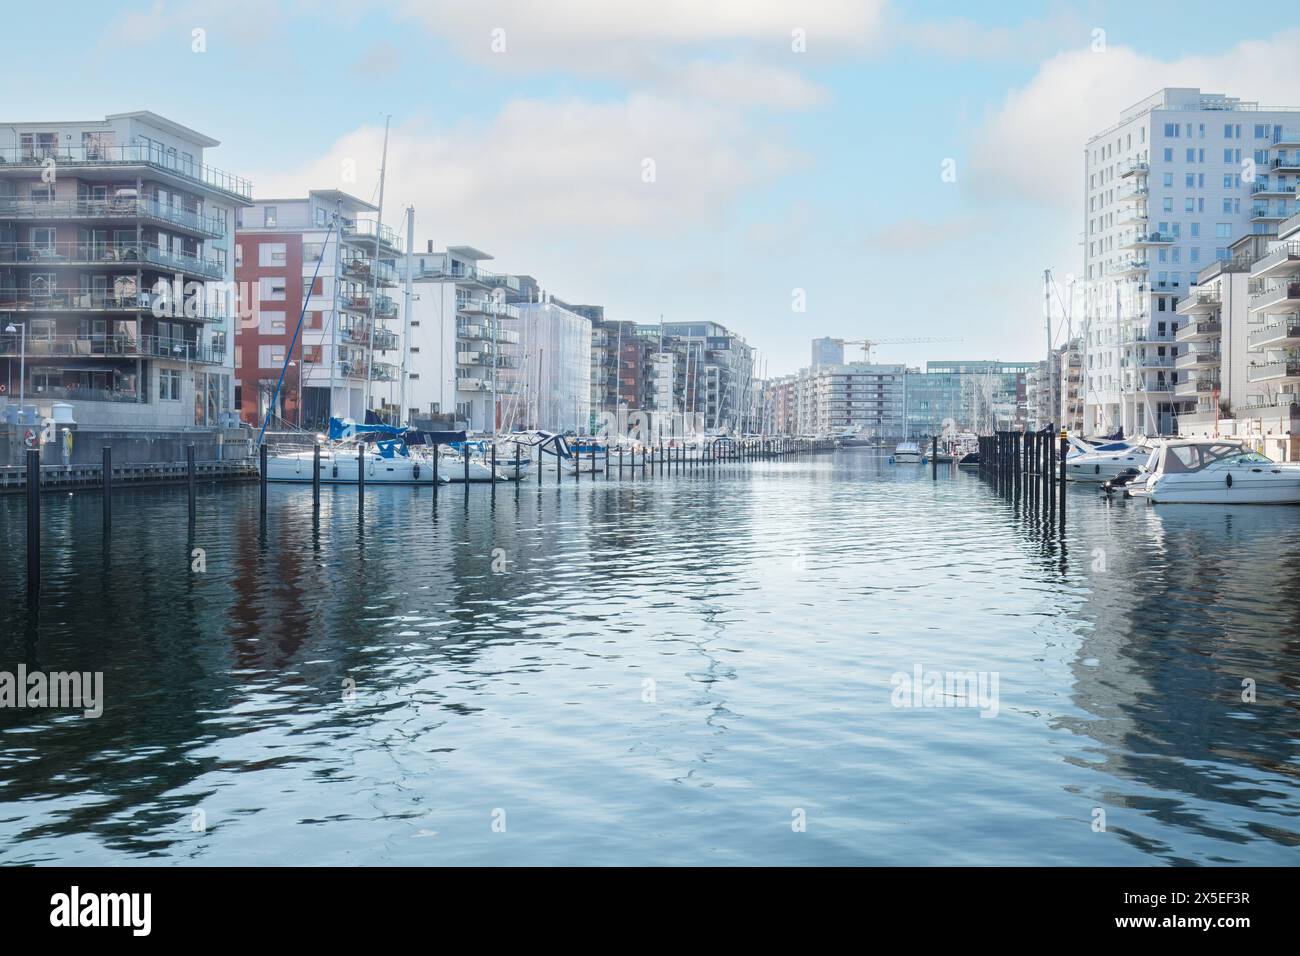 Cityscape at a Dockan Marina in Malmö, where boats dock in calm waters . Concepts: urban expansion, waterfront living, Malmö Stock Photo